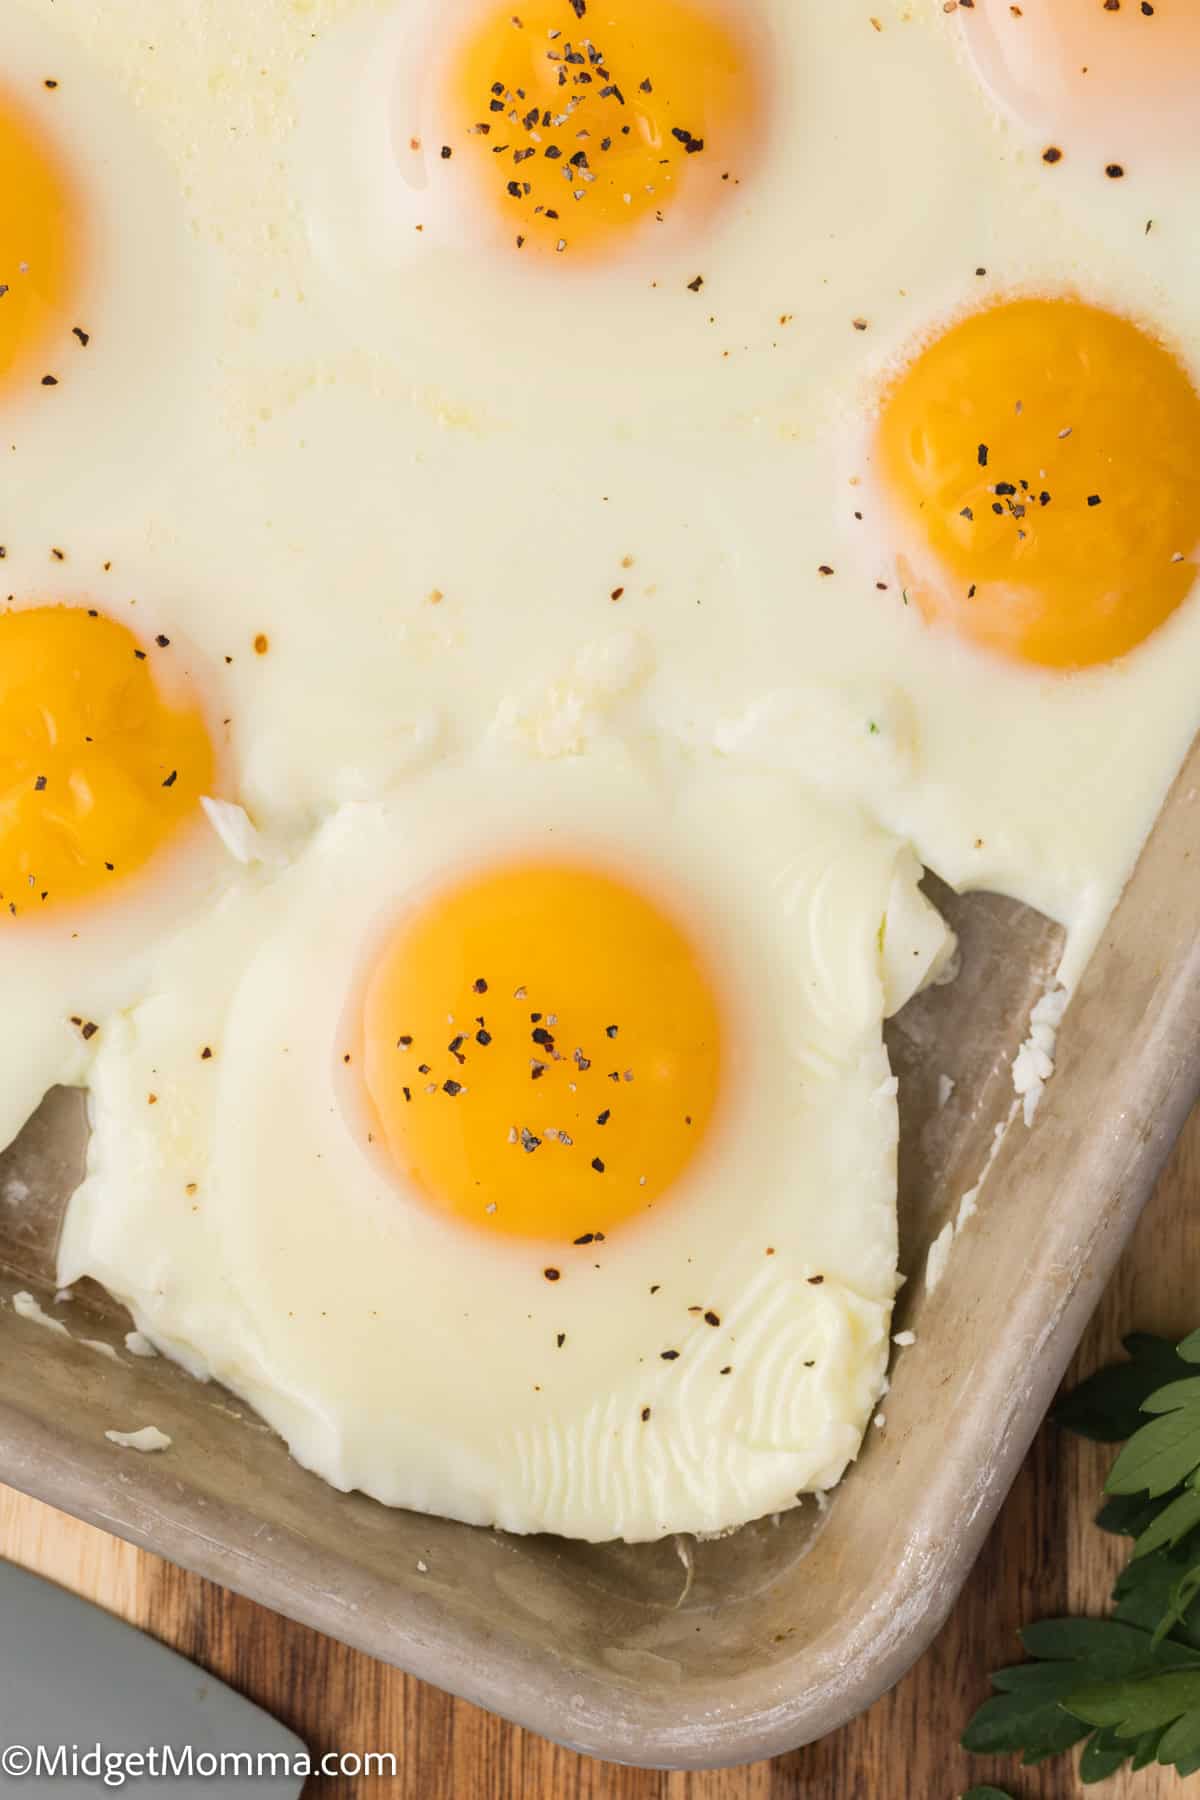 A baking sheet with several baked eggs, featuring bright yellow yolks and seasoned with black pepper.